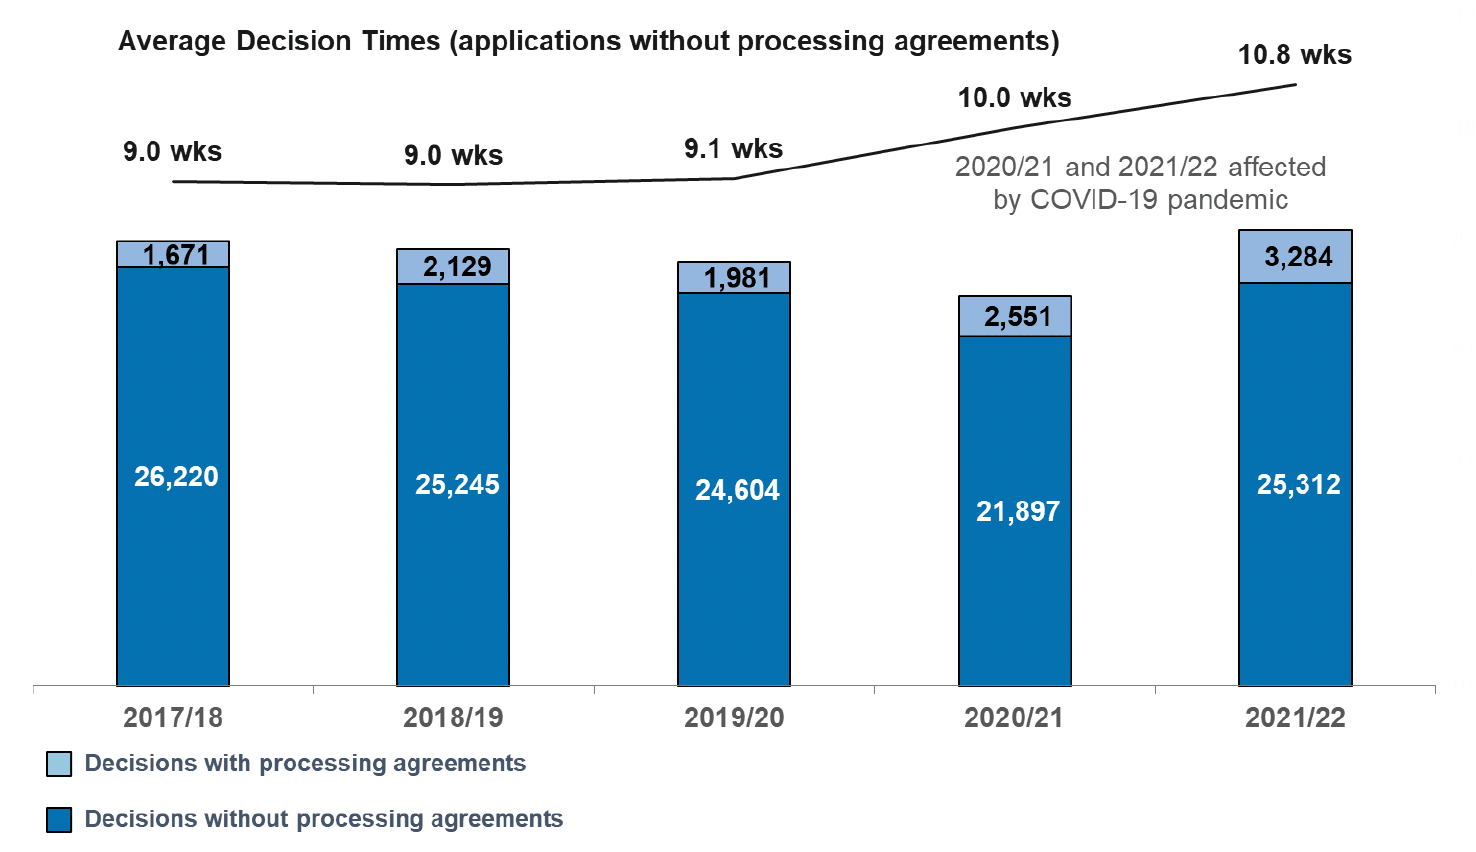 A stacked column chart showing number of local applications decided since 2017/18. Also a line chart of average decision times for local applications without processing agreements. Numbers dipped in 2020/21 as the pandemic hit, then have been slightly higher in 2021/22 than before the pandemic. Average decision times rose in 2020/21 and again in 2021/22 to 10.8 weeks.